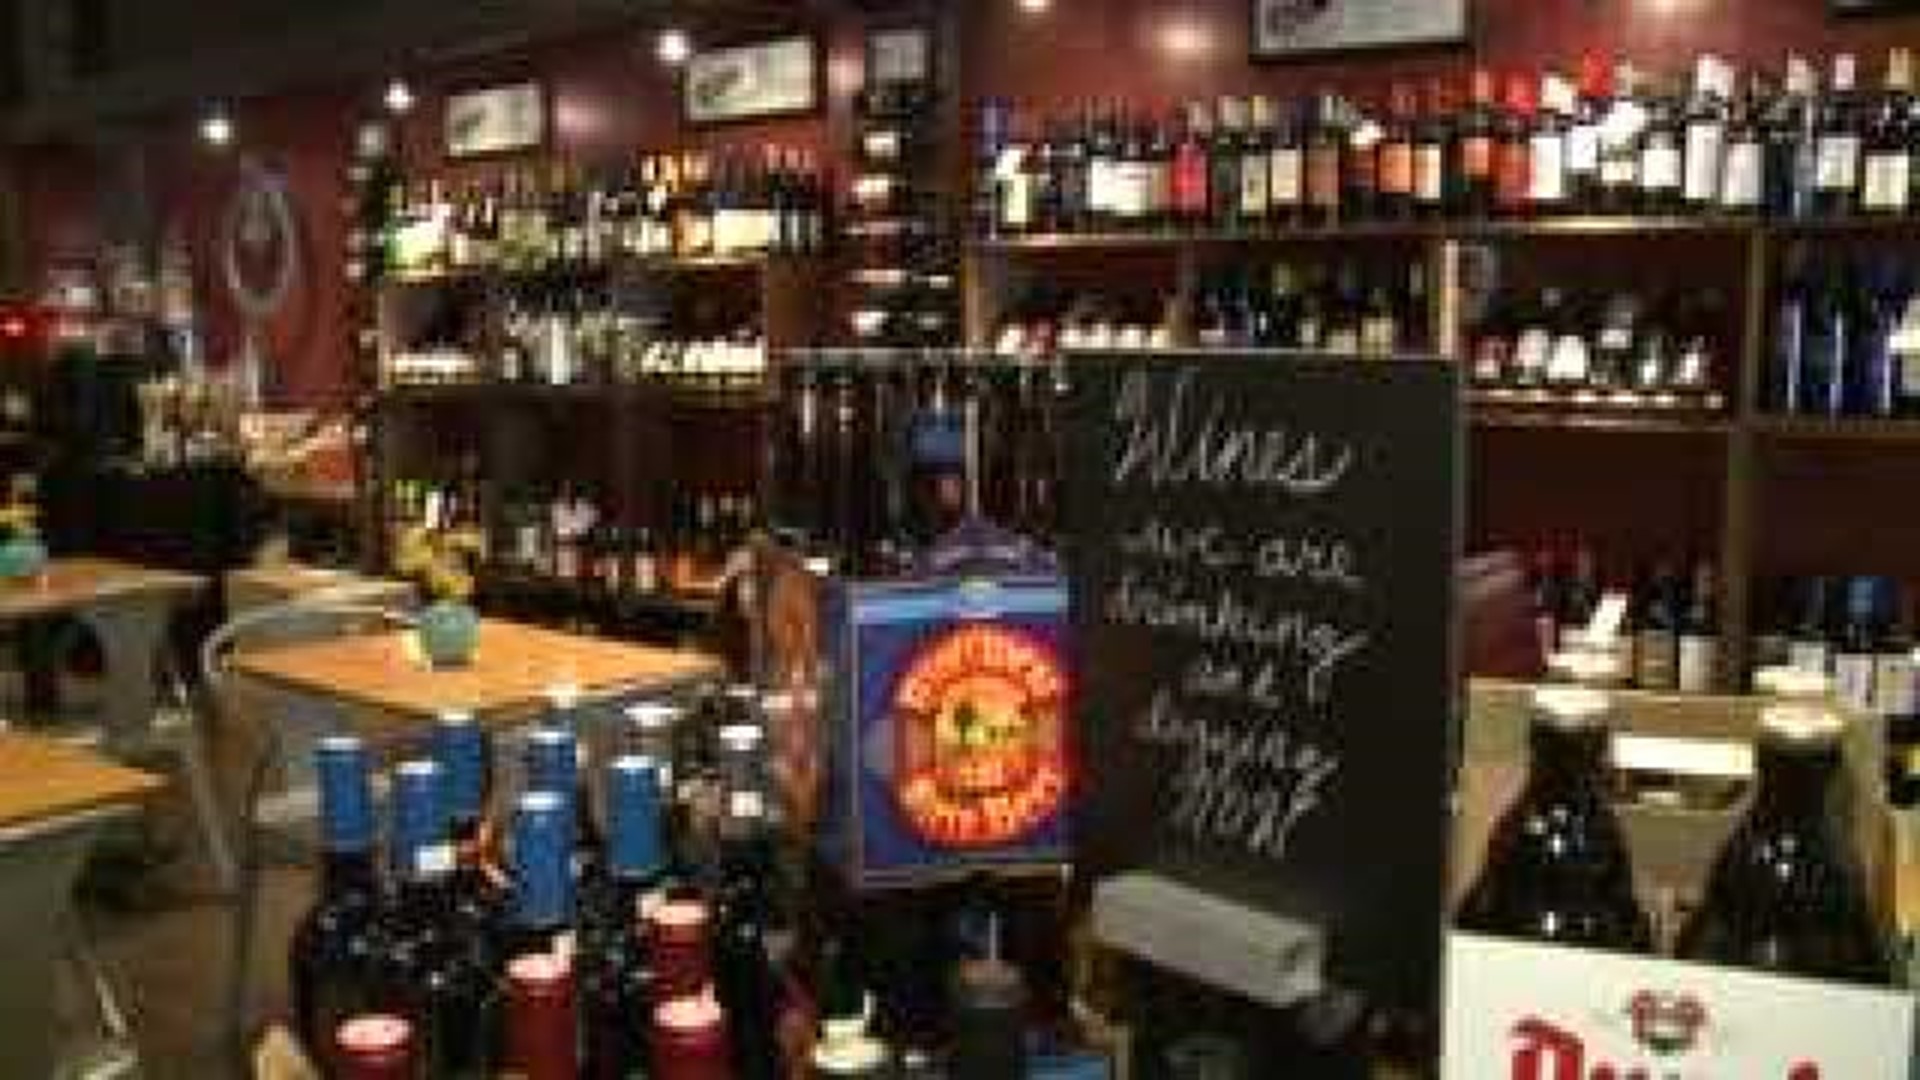 Monmouth wine store gets national attention